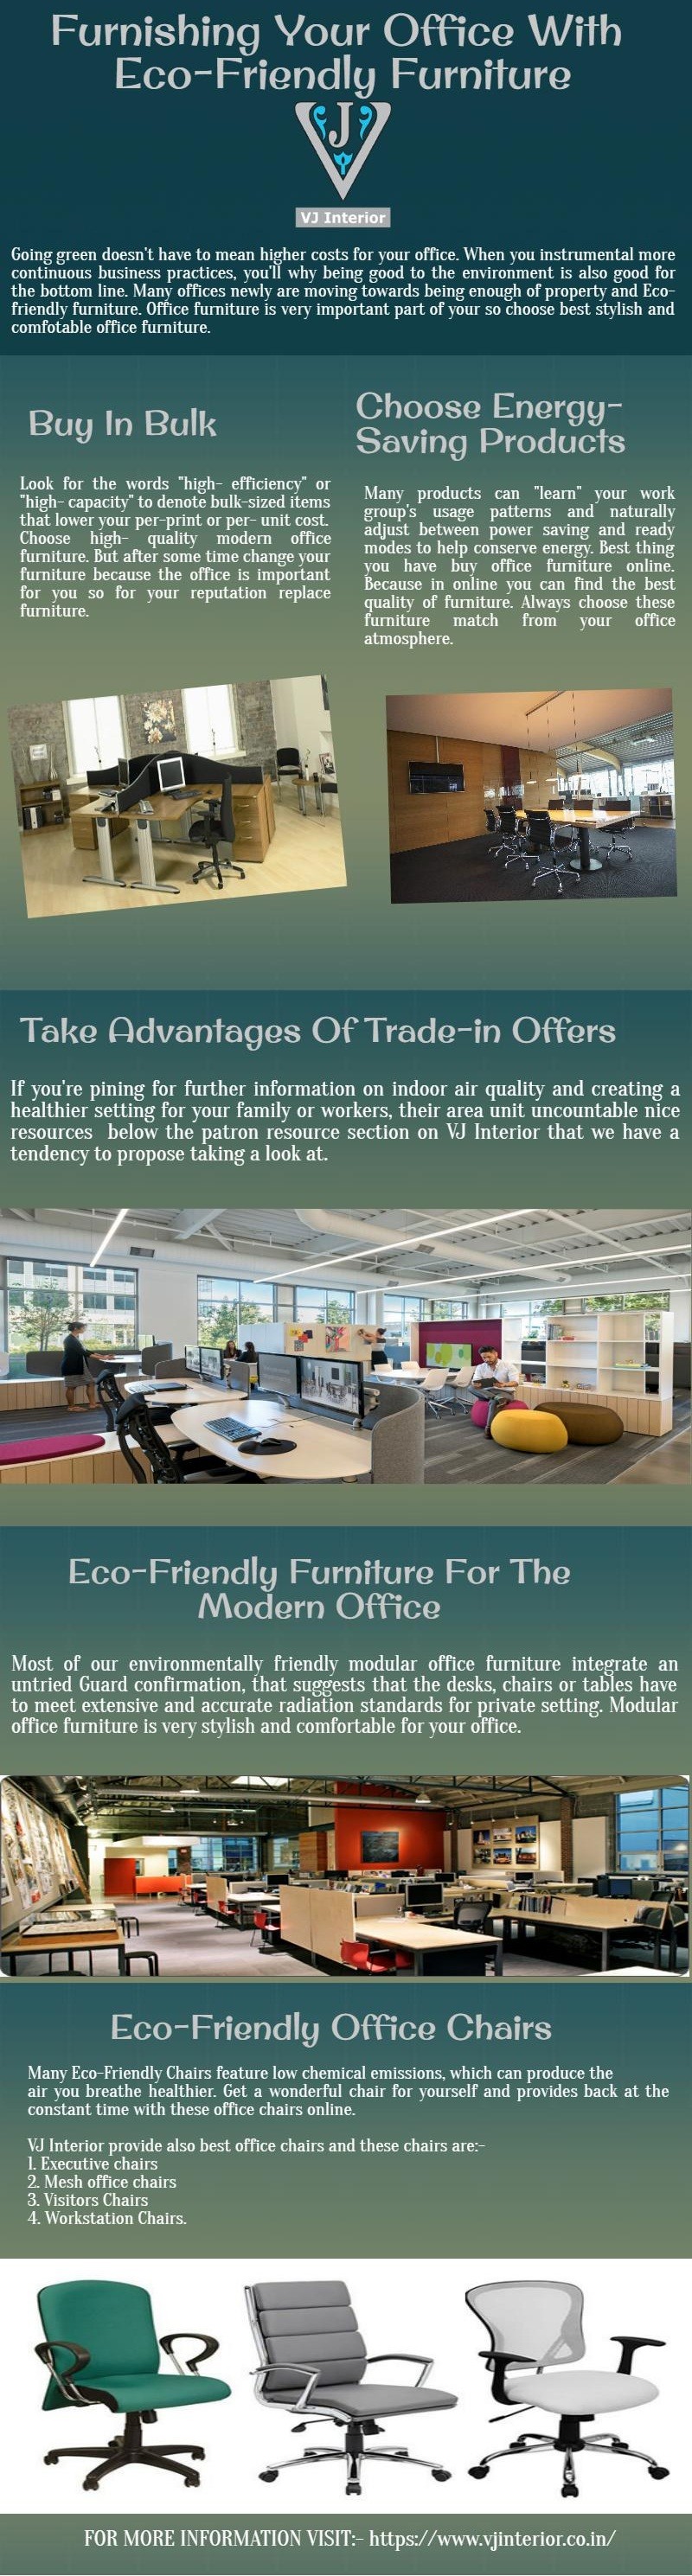 Affordable Eco Friendly Furniture